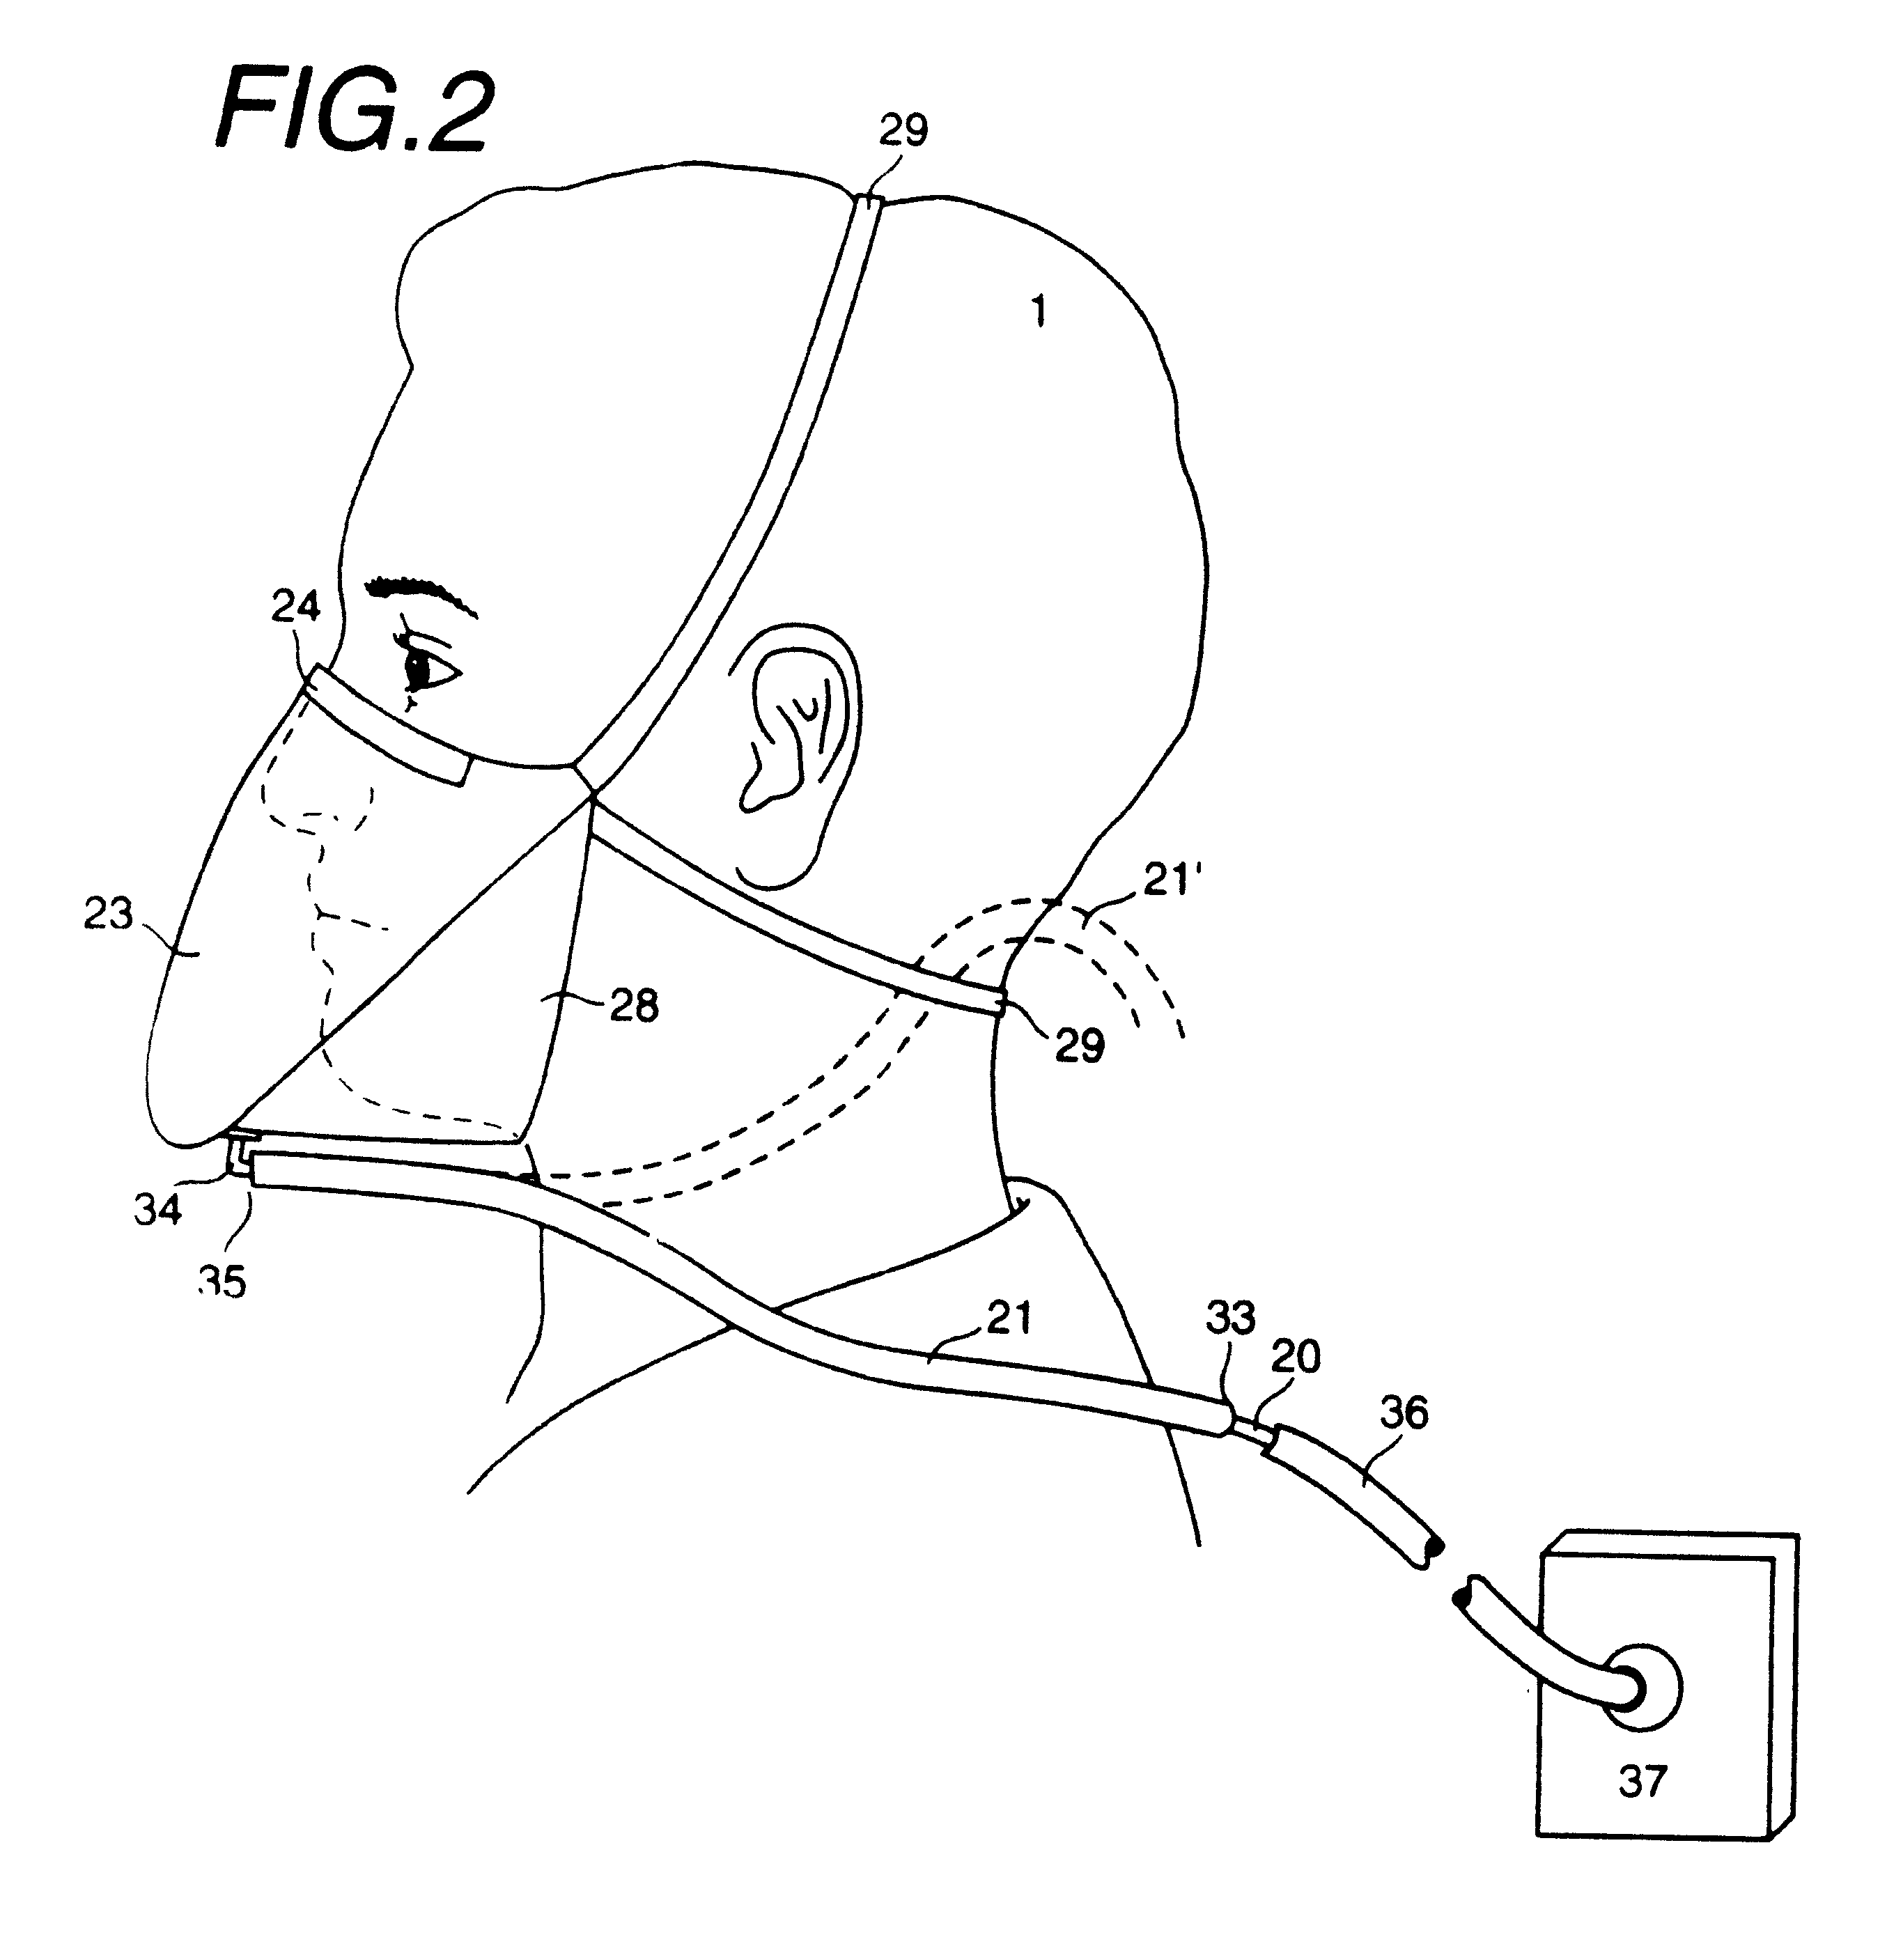 Disposable mask and suction catheter